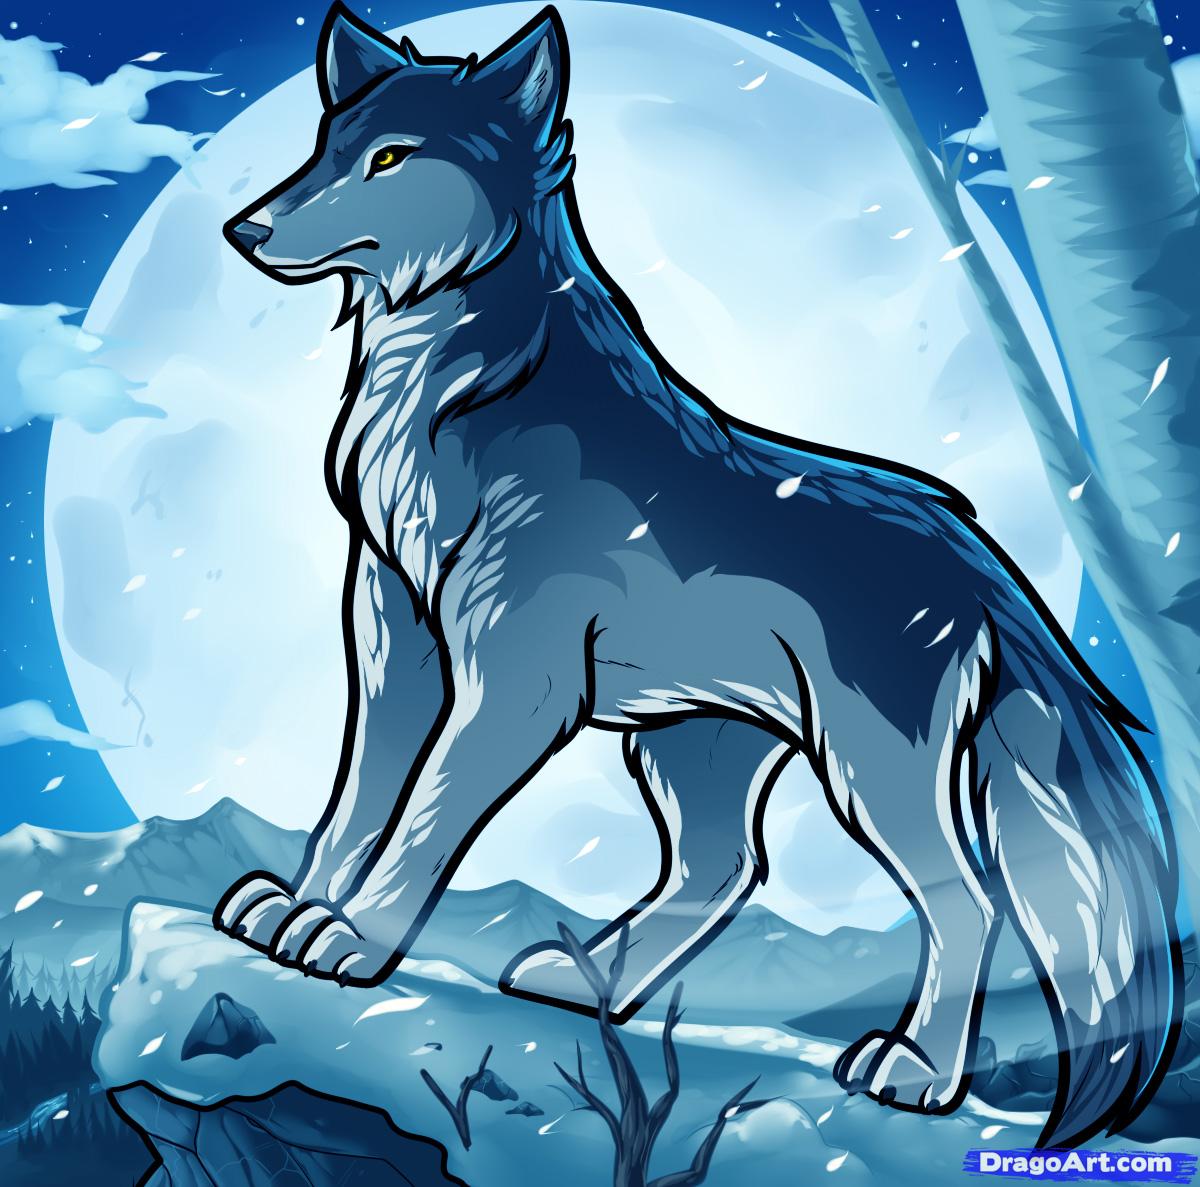 Anime Wolves Image Jake The Wolf HD Wallpaper And